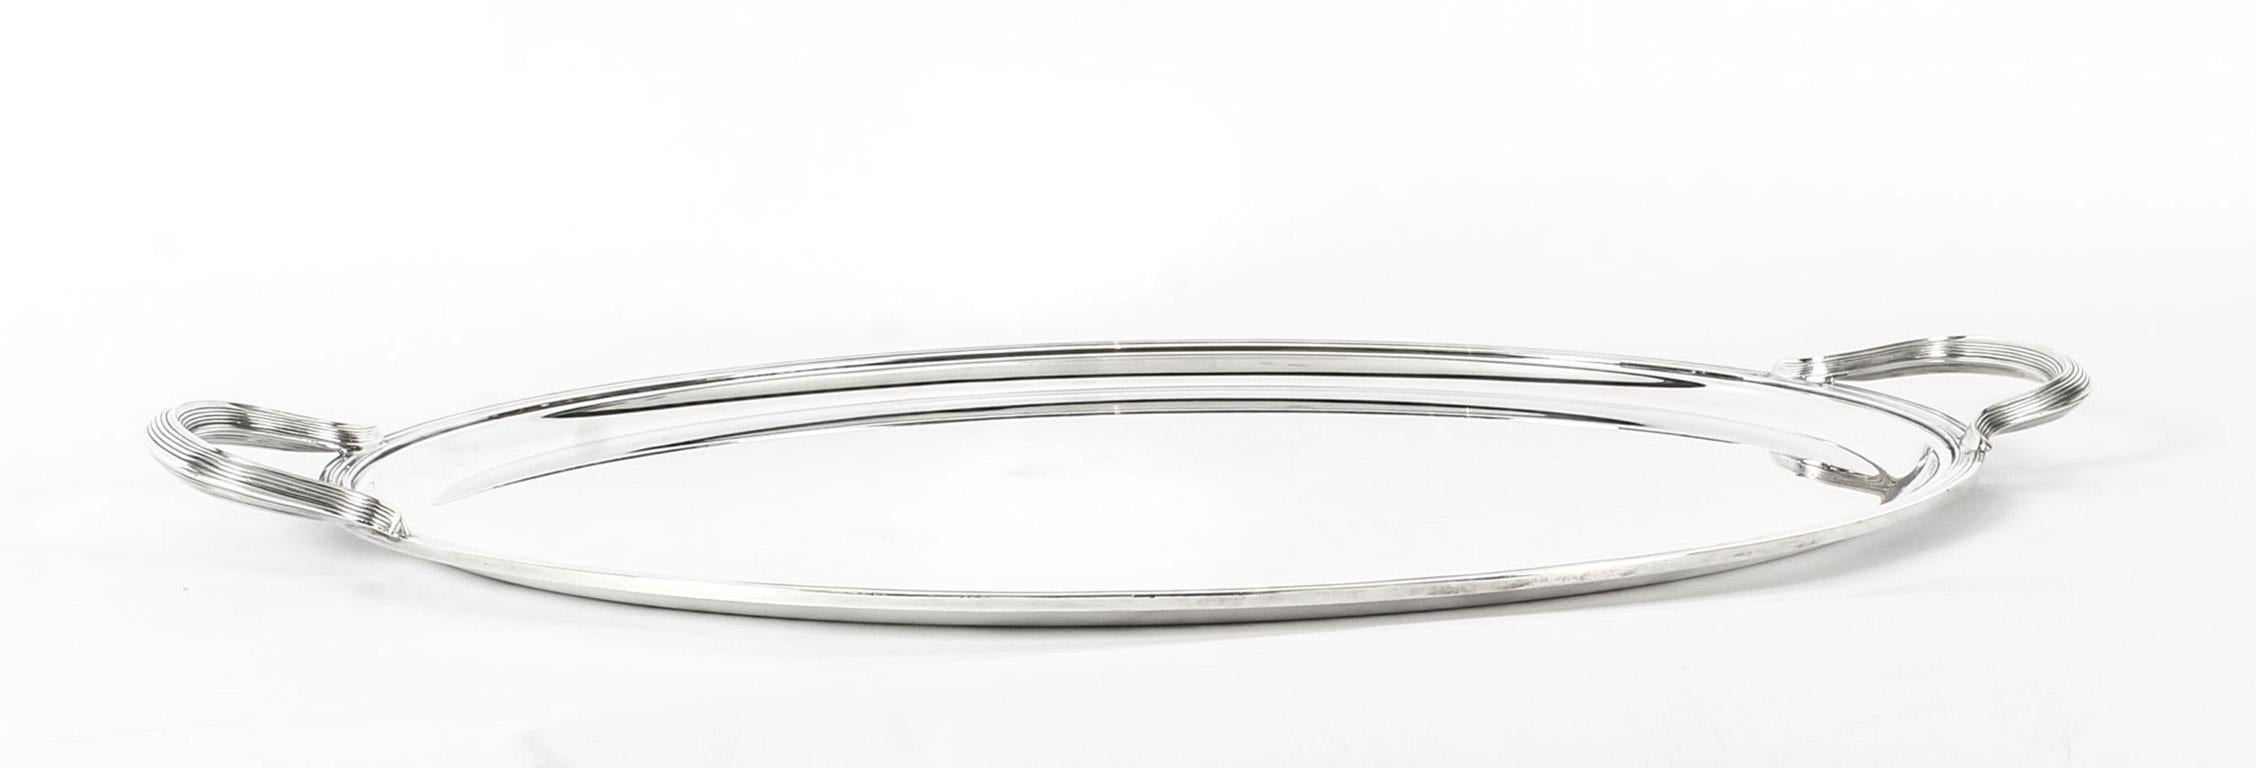 Large French Silver Plated Twin Handled Oval Tray by Christofle 19th Century 6